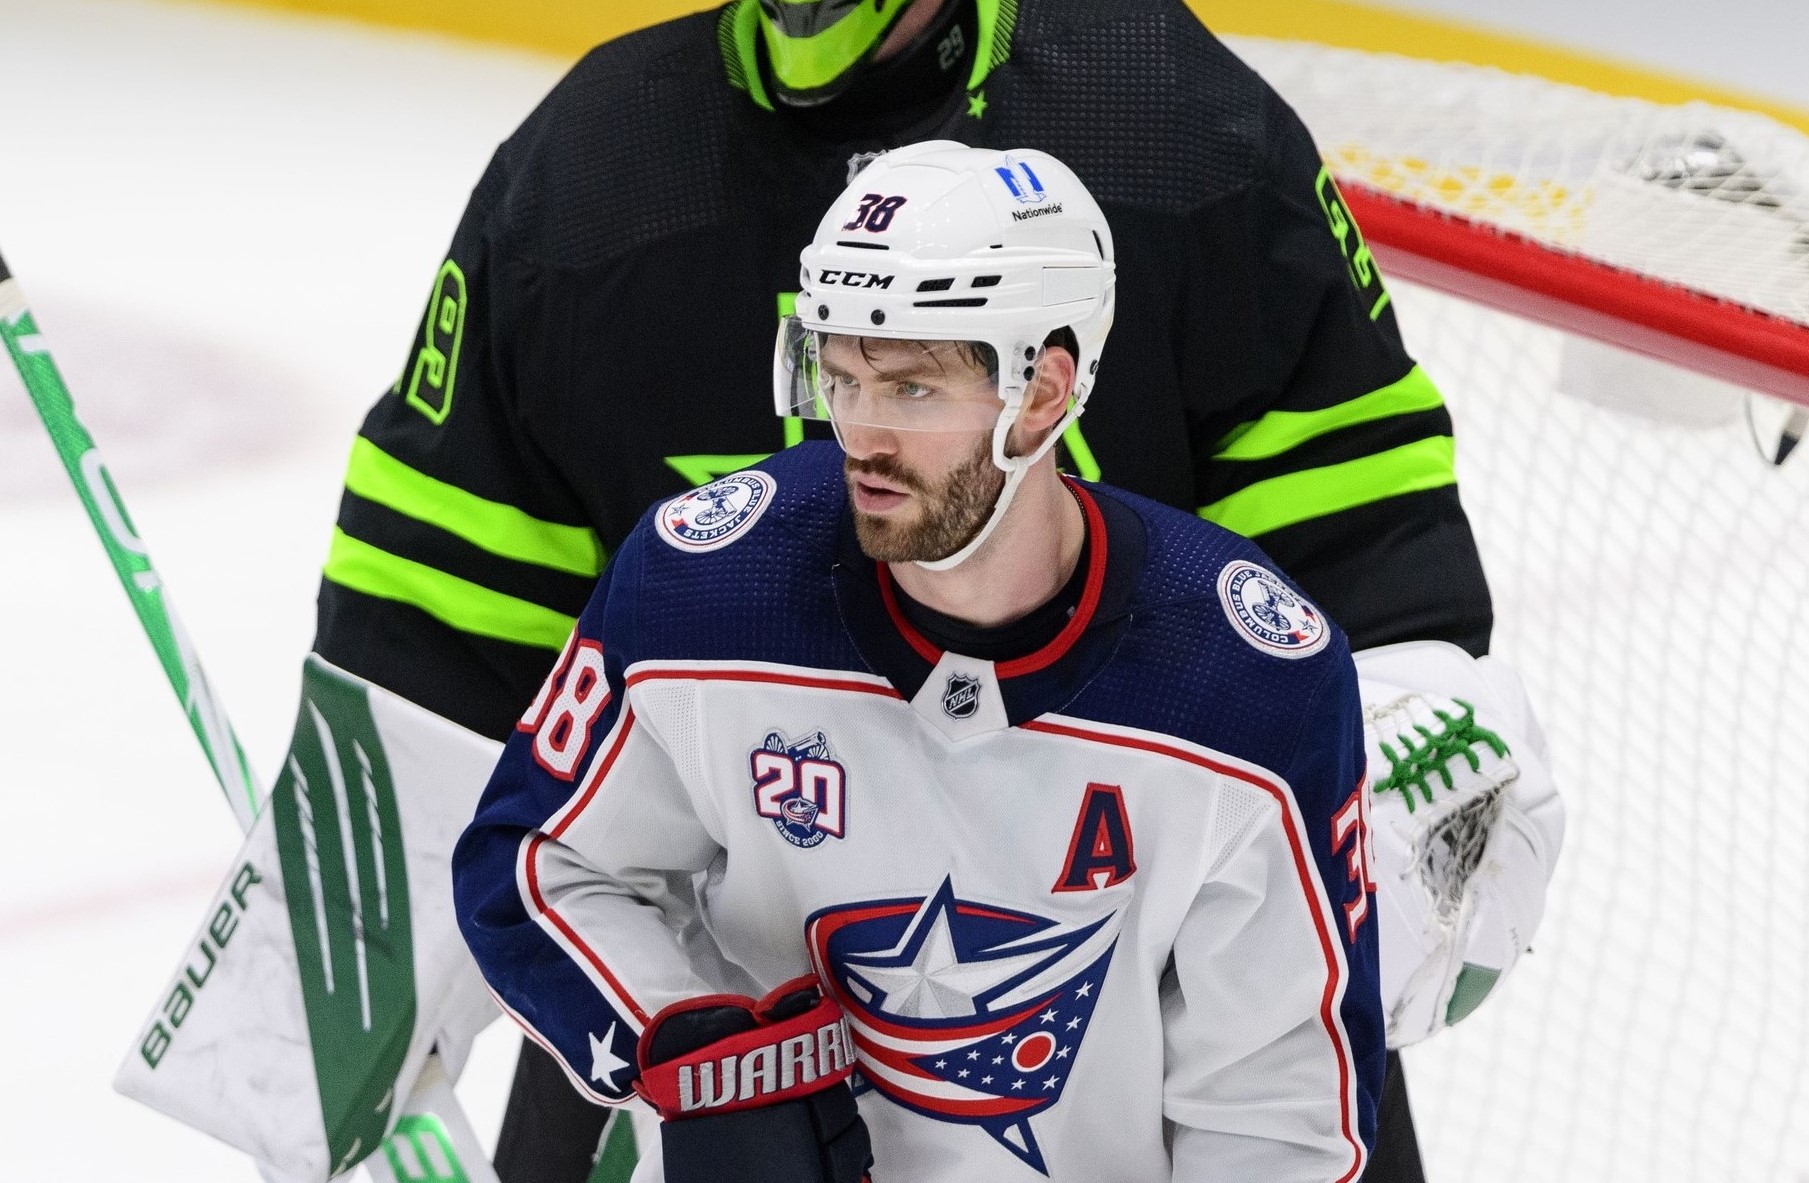 A look into the Columbus Blue Jackets' locker room with team captain Boone  Jenner